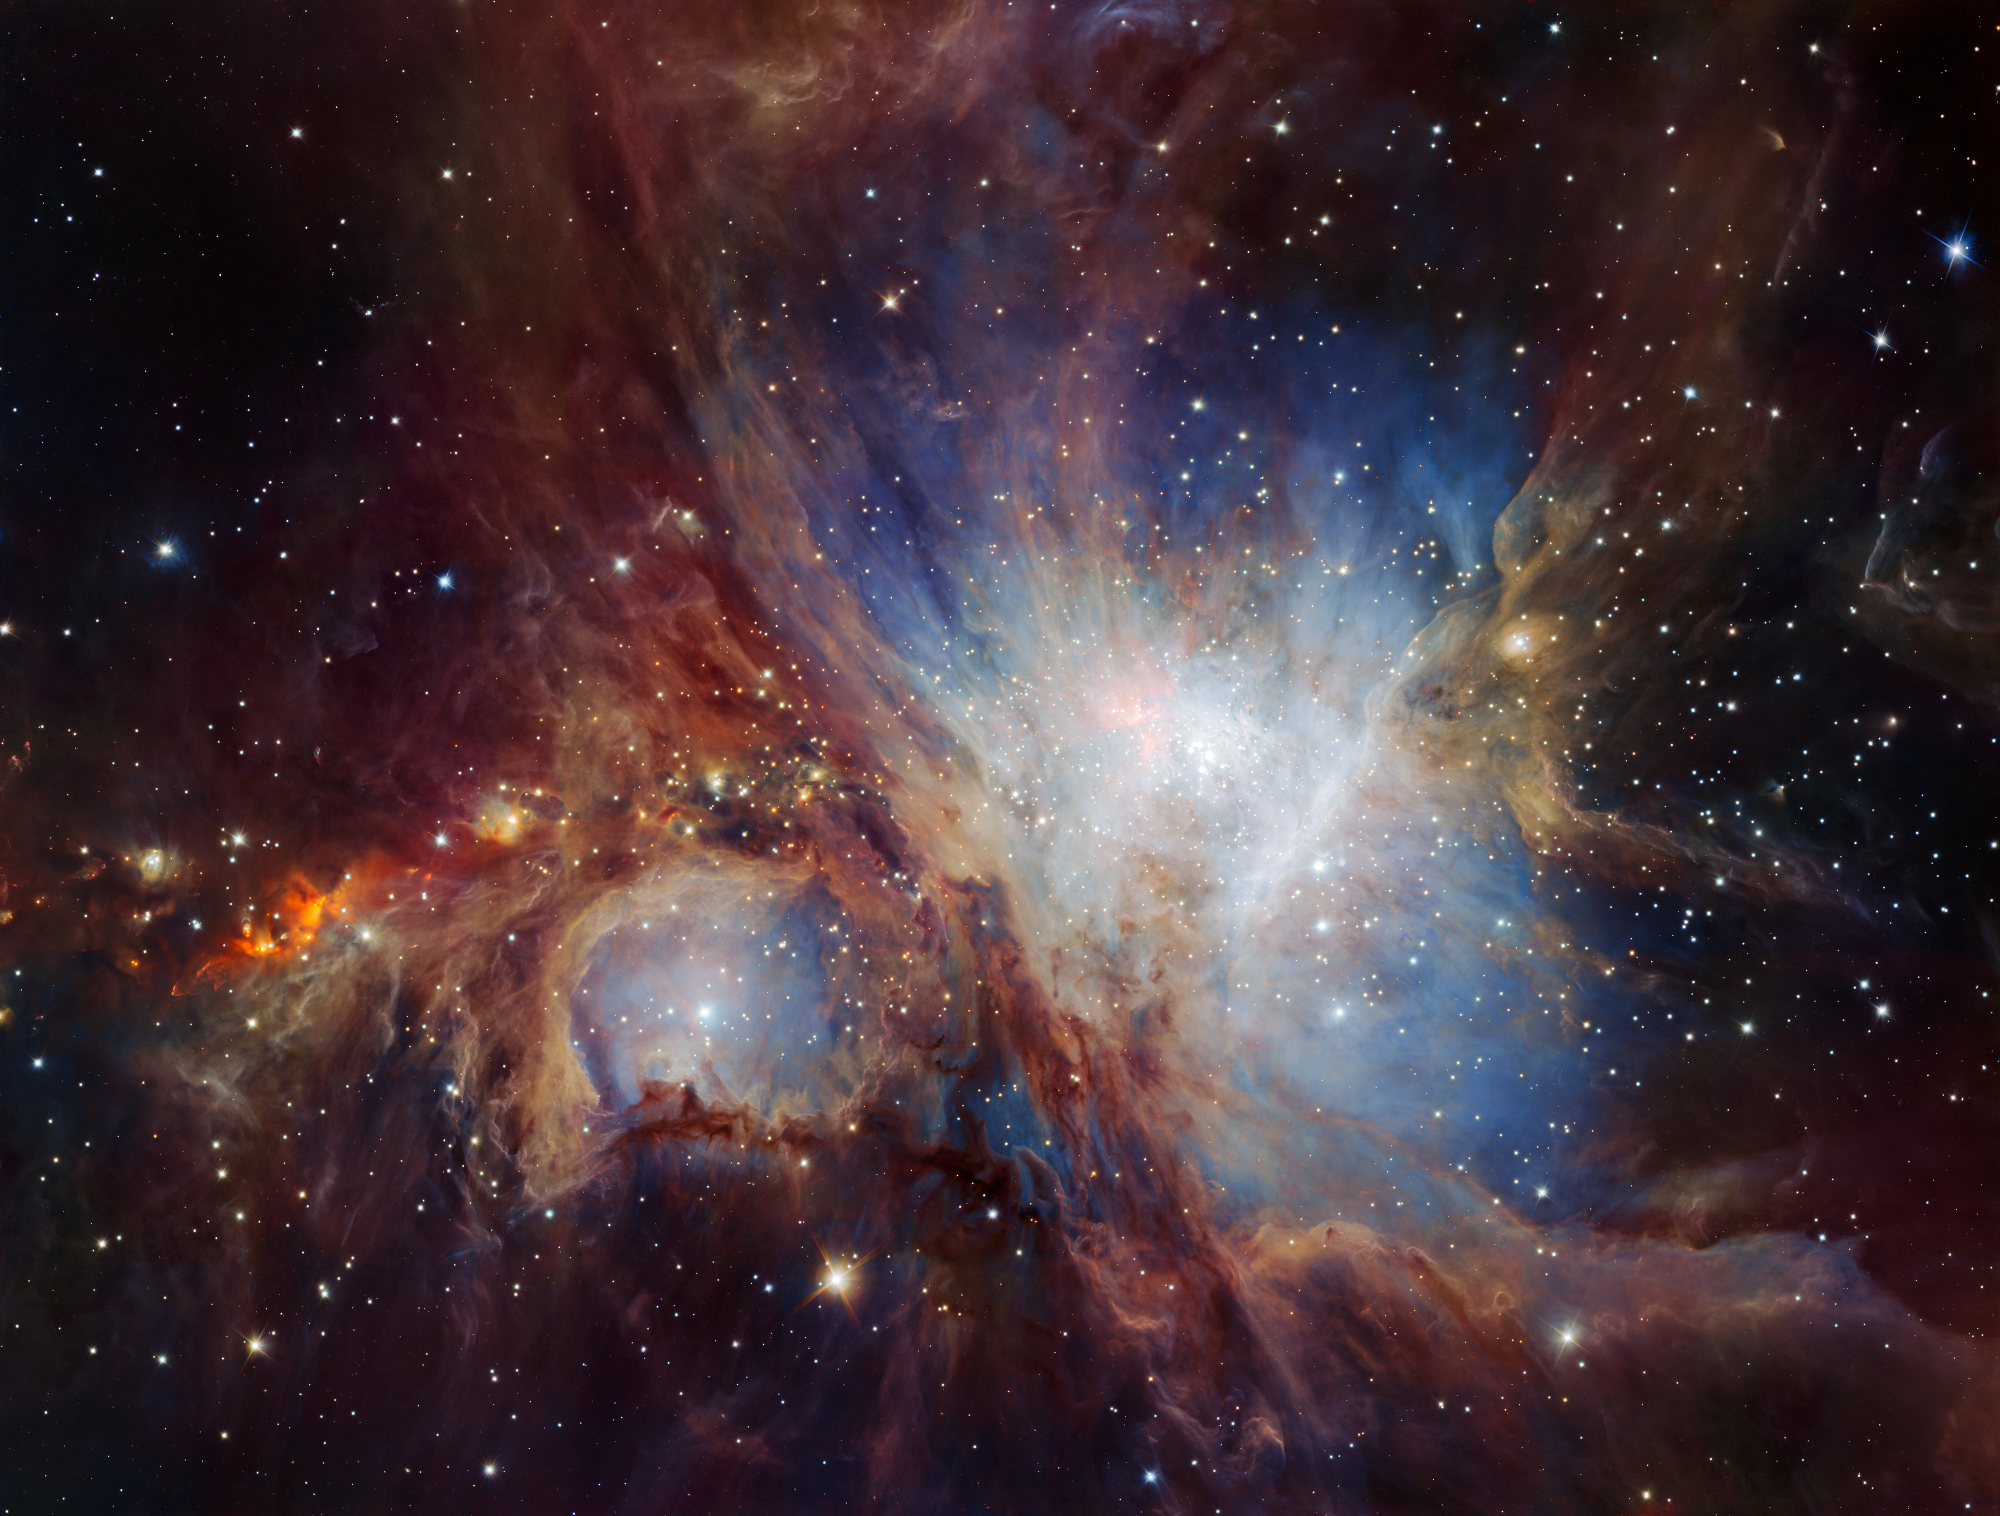 This Is The Deepest View Yet Into The Orion Nebula